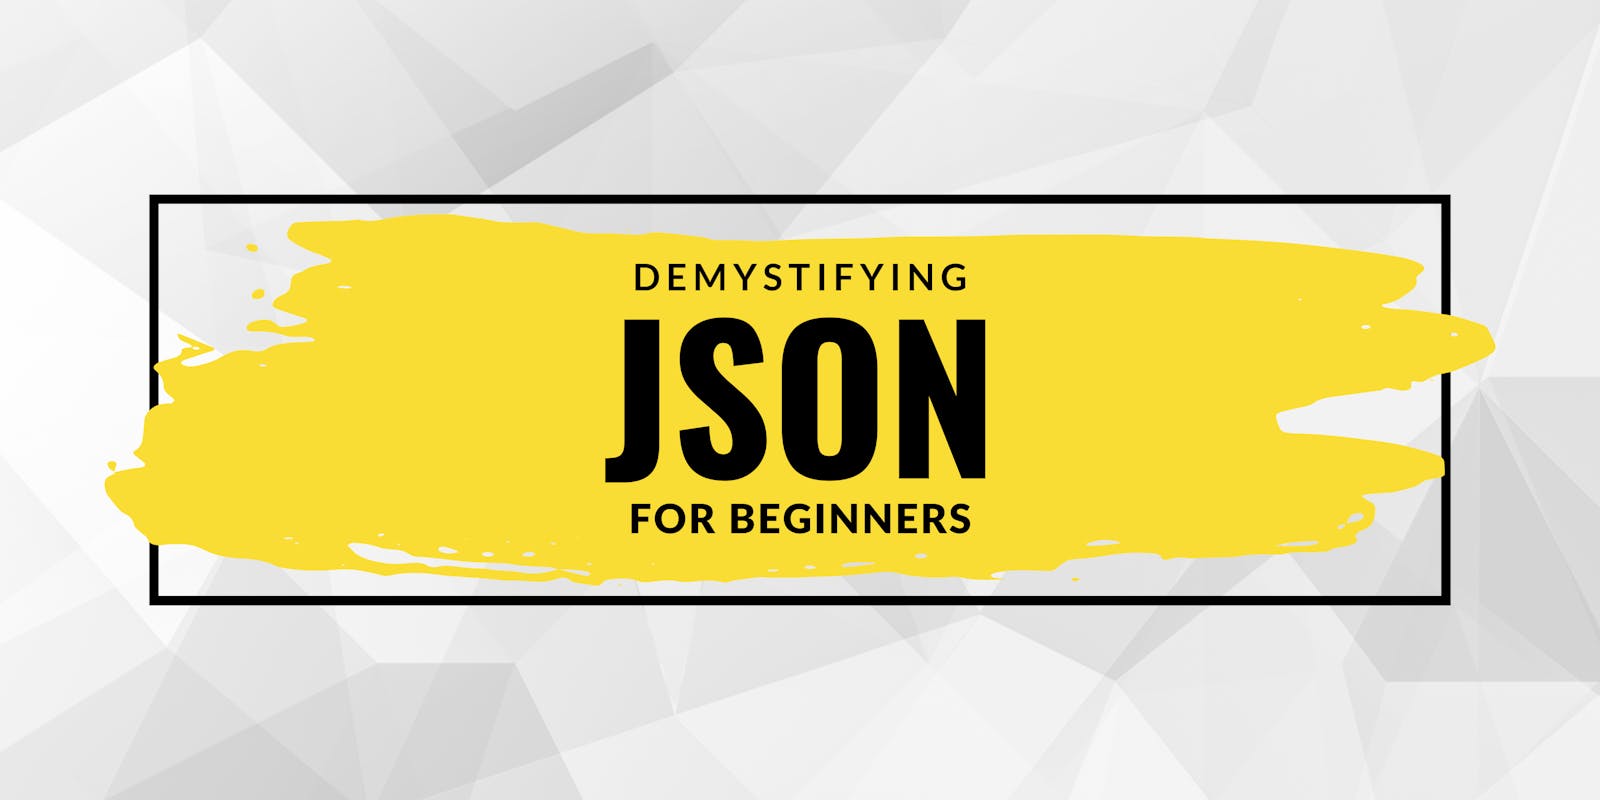 Demystifying JSON for Beginners